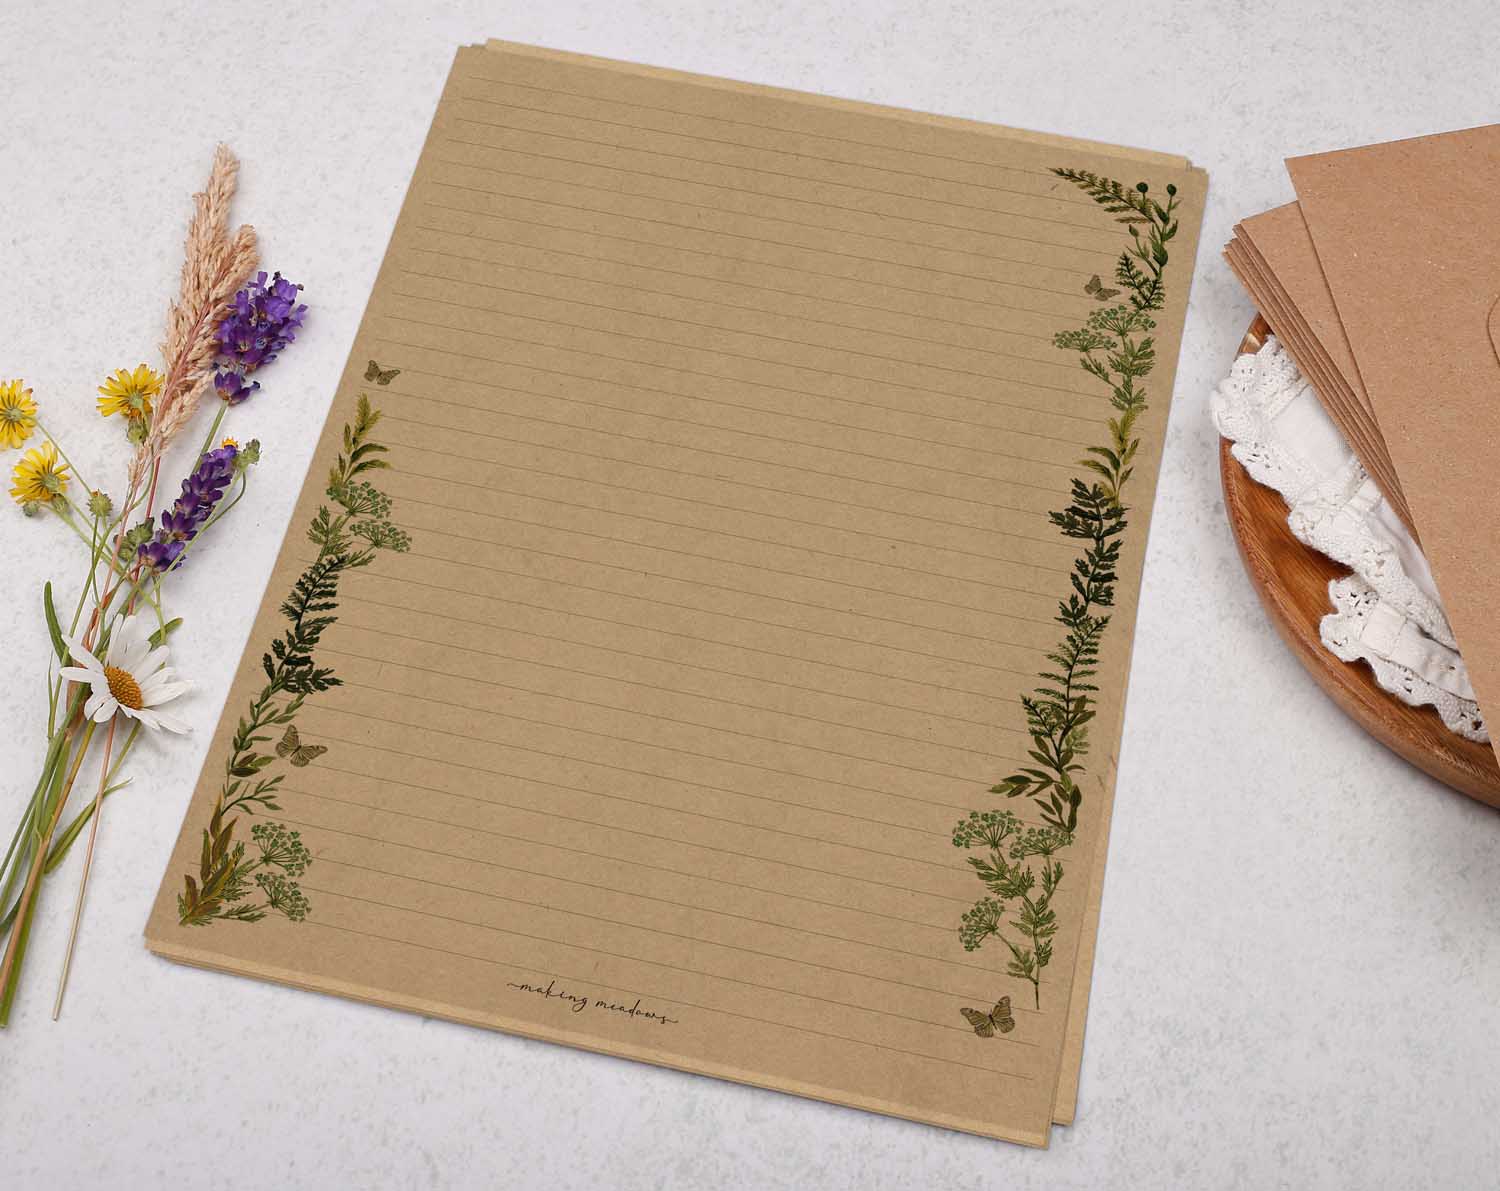 A4 Kraft letter writing paper sheets with a beautiful botanic fern watercolour border design cascading around the edge.